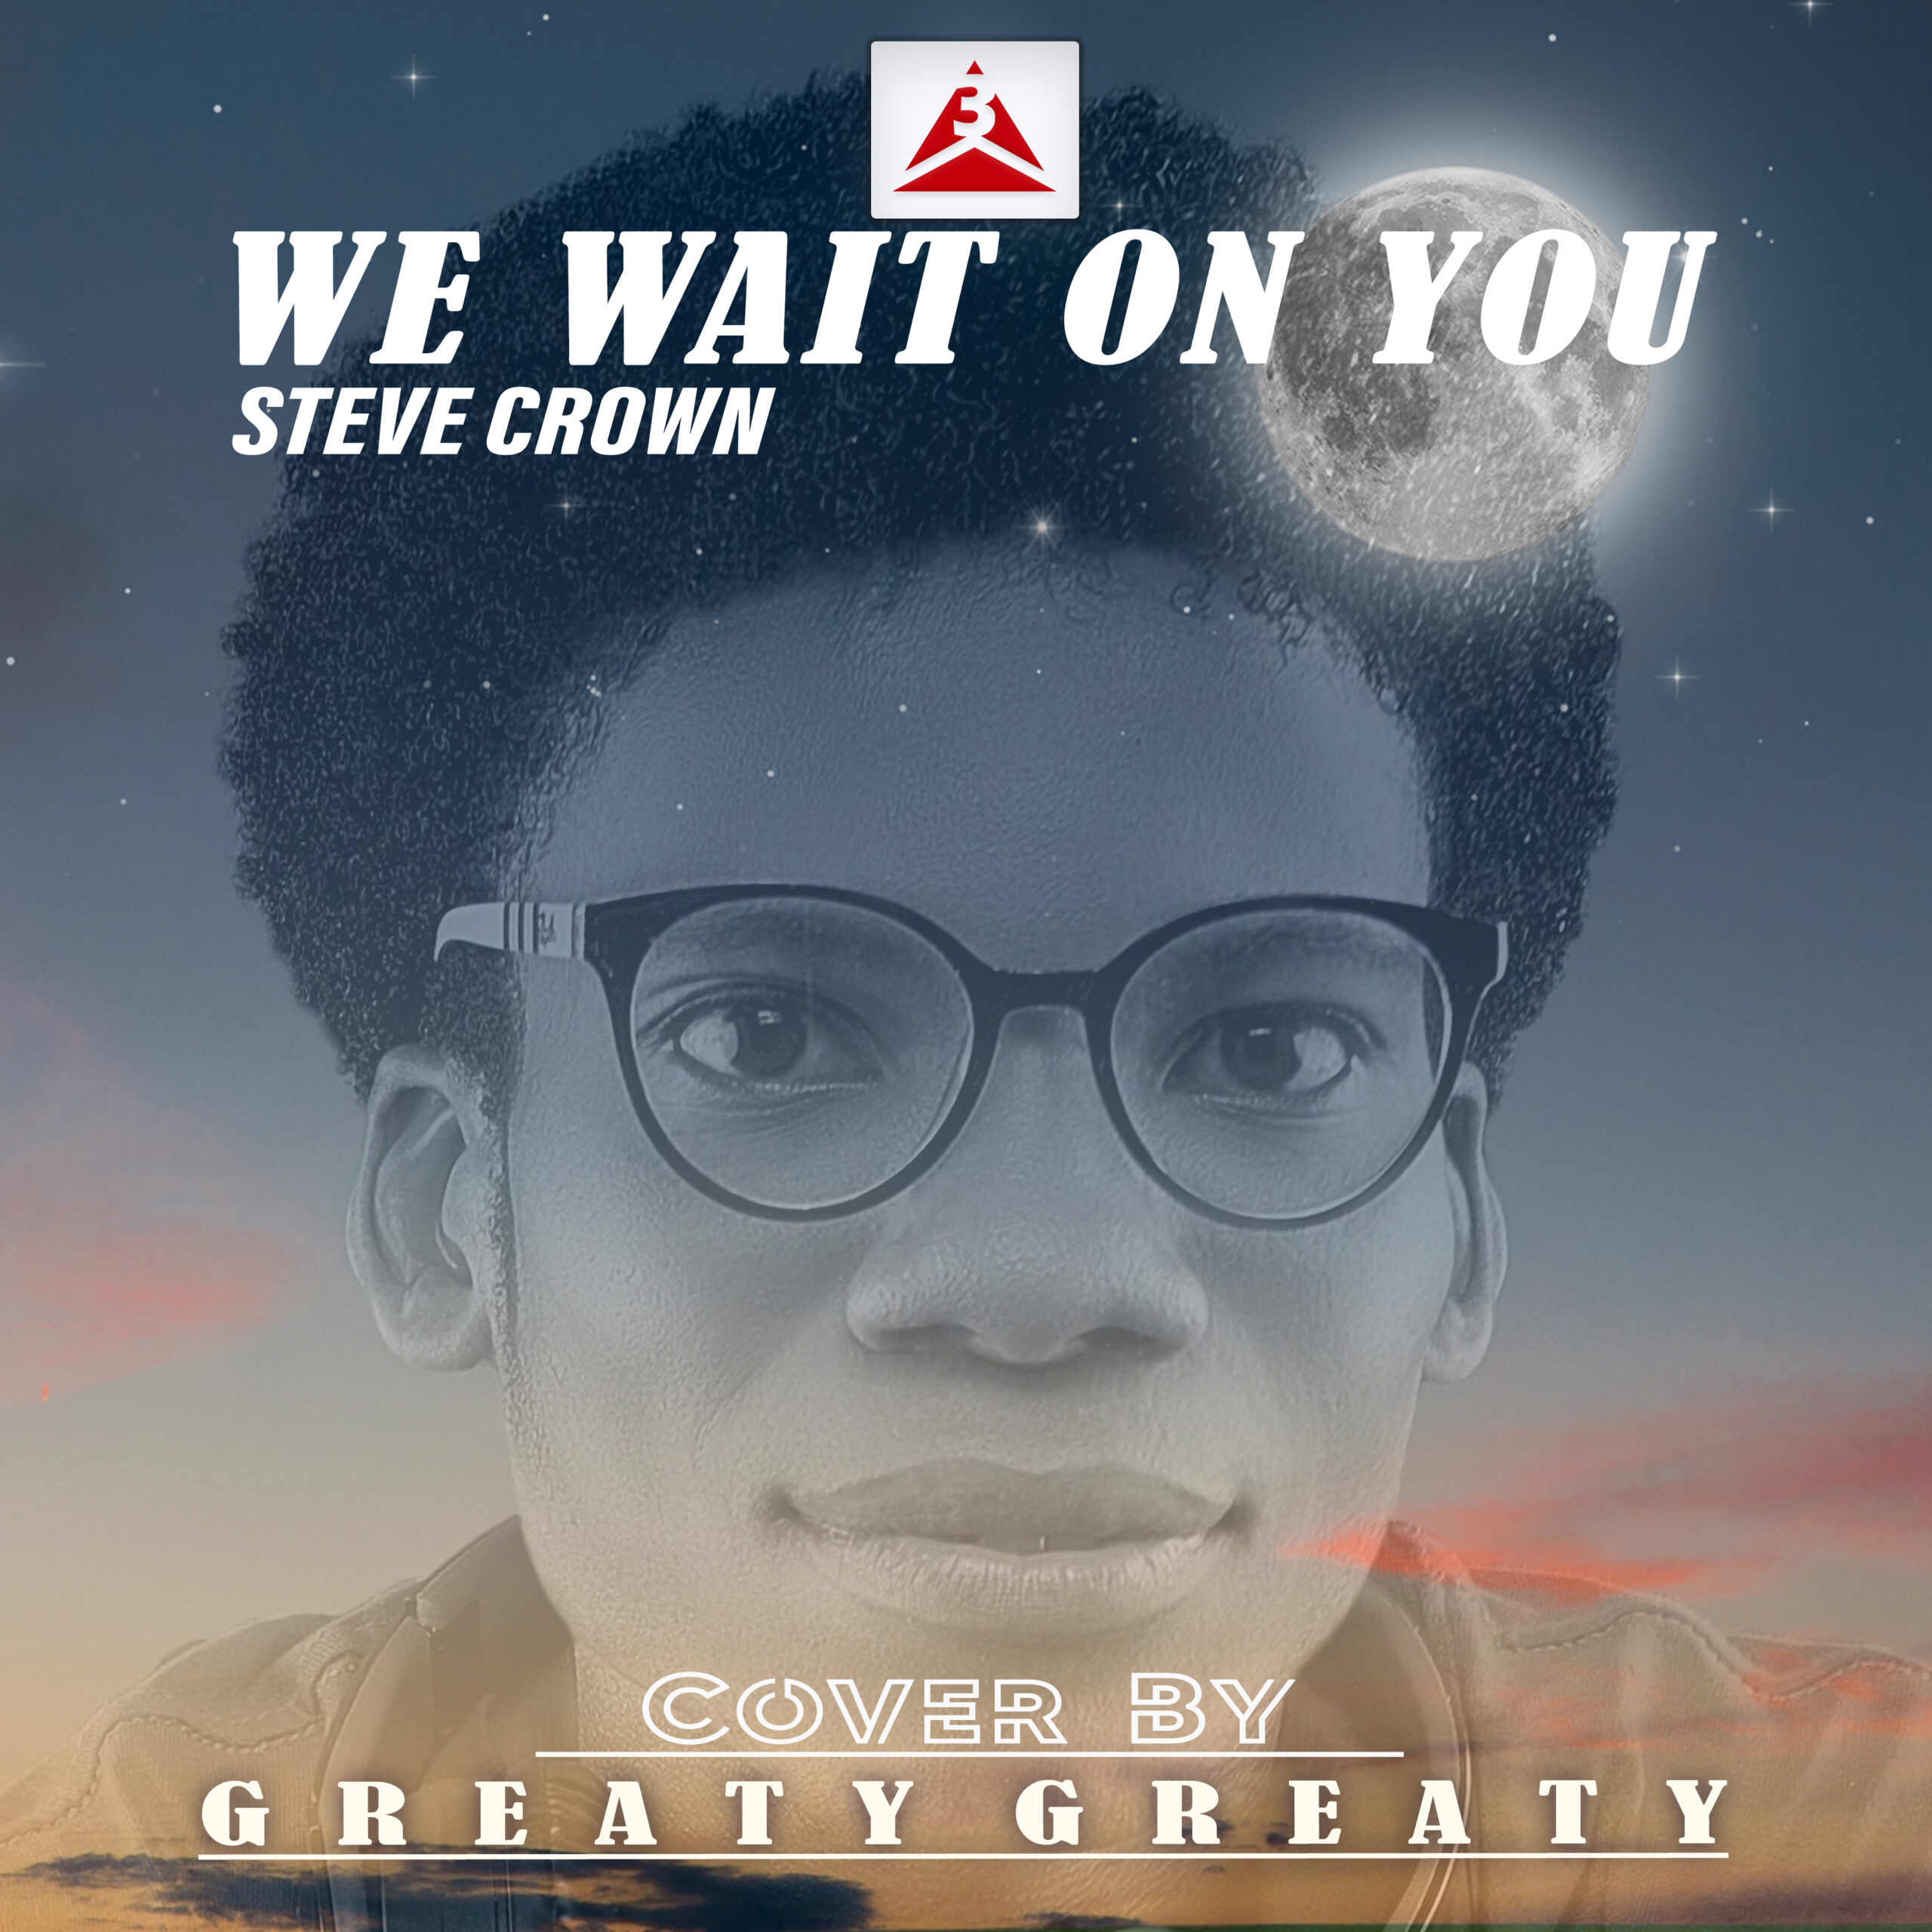 We wait on you (Cover) - Greaty Greaty (Steve Crown)